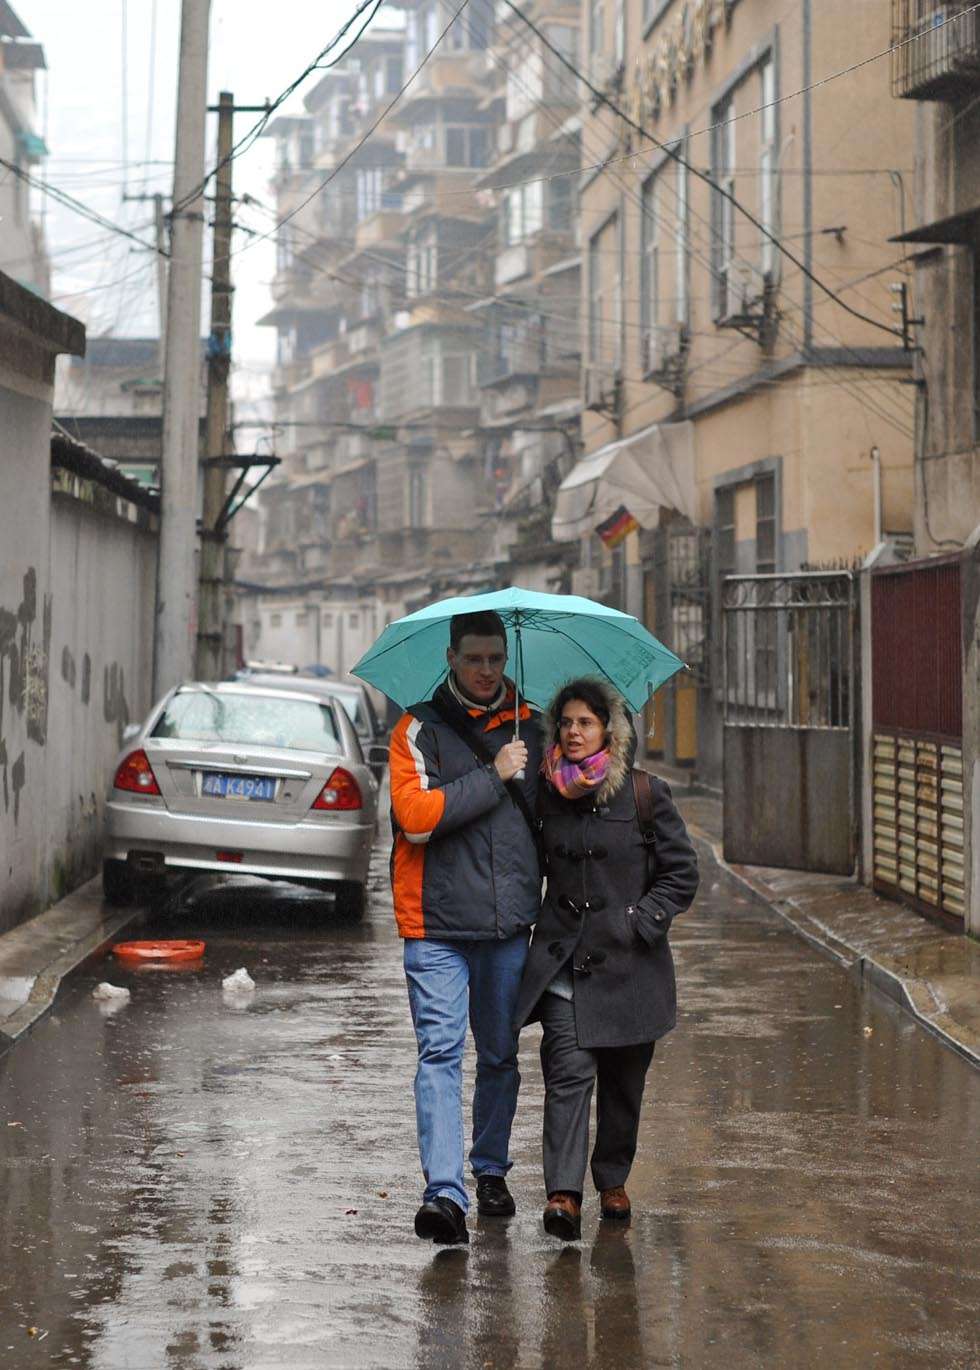 Uwe Brutzer (L) and his wife Dorothee Brutzer walk to a rehabilitation training center in Changsha, capital of central China's Hunan Province, Feb. 21, 2012.(Xinhua/Bai Yu)